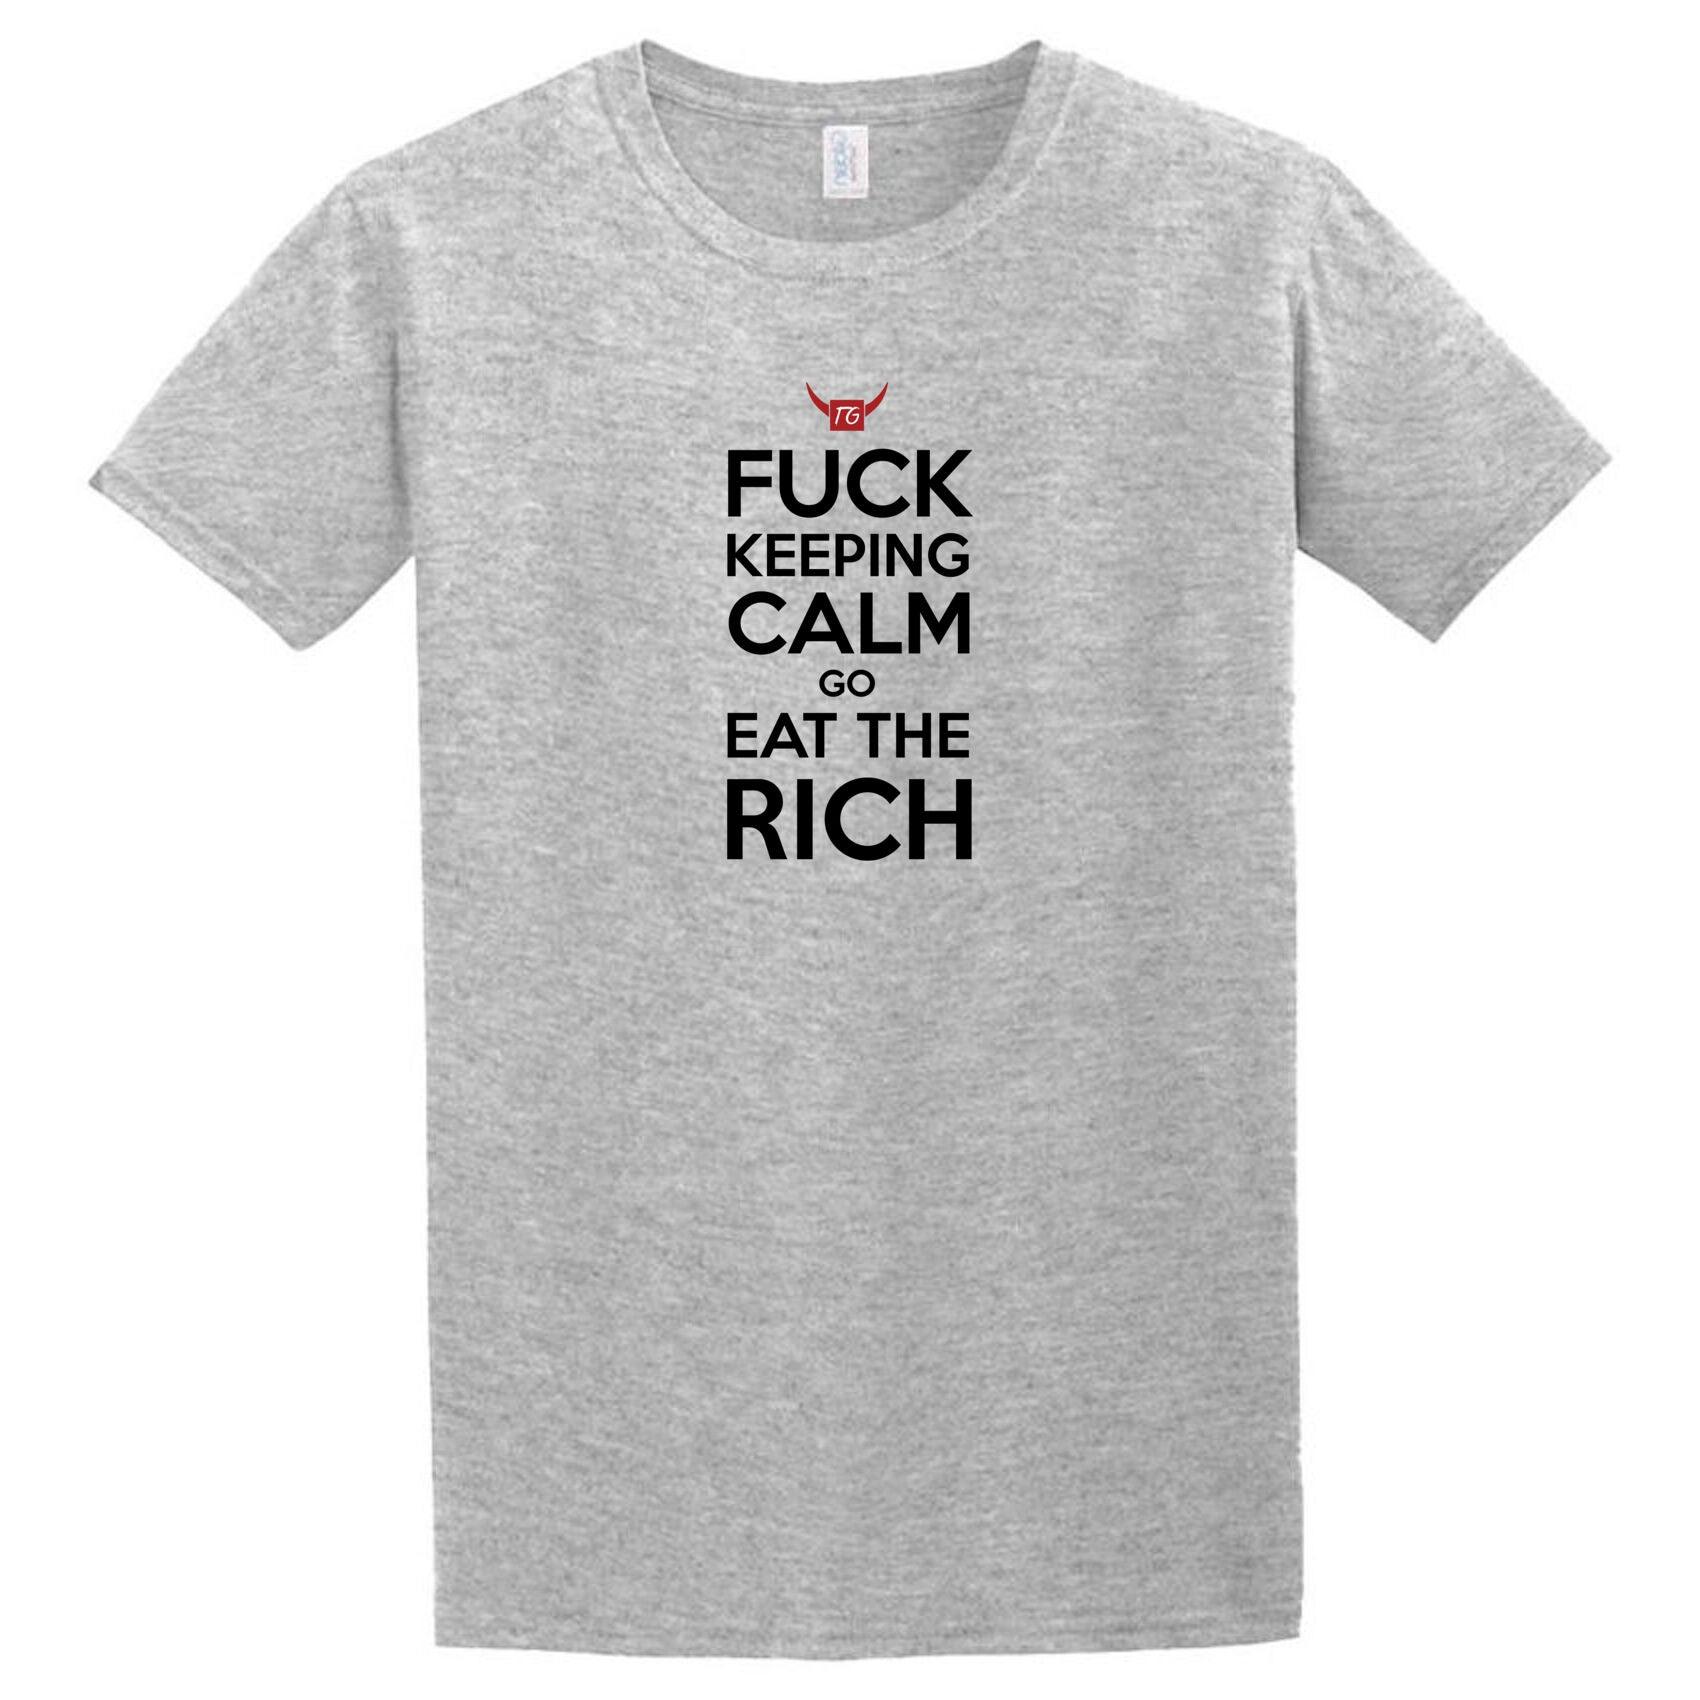 A Twisted Gifts Eat The Rich T-Shirt that says fuck keep calm.